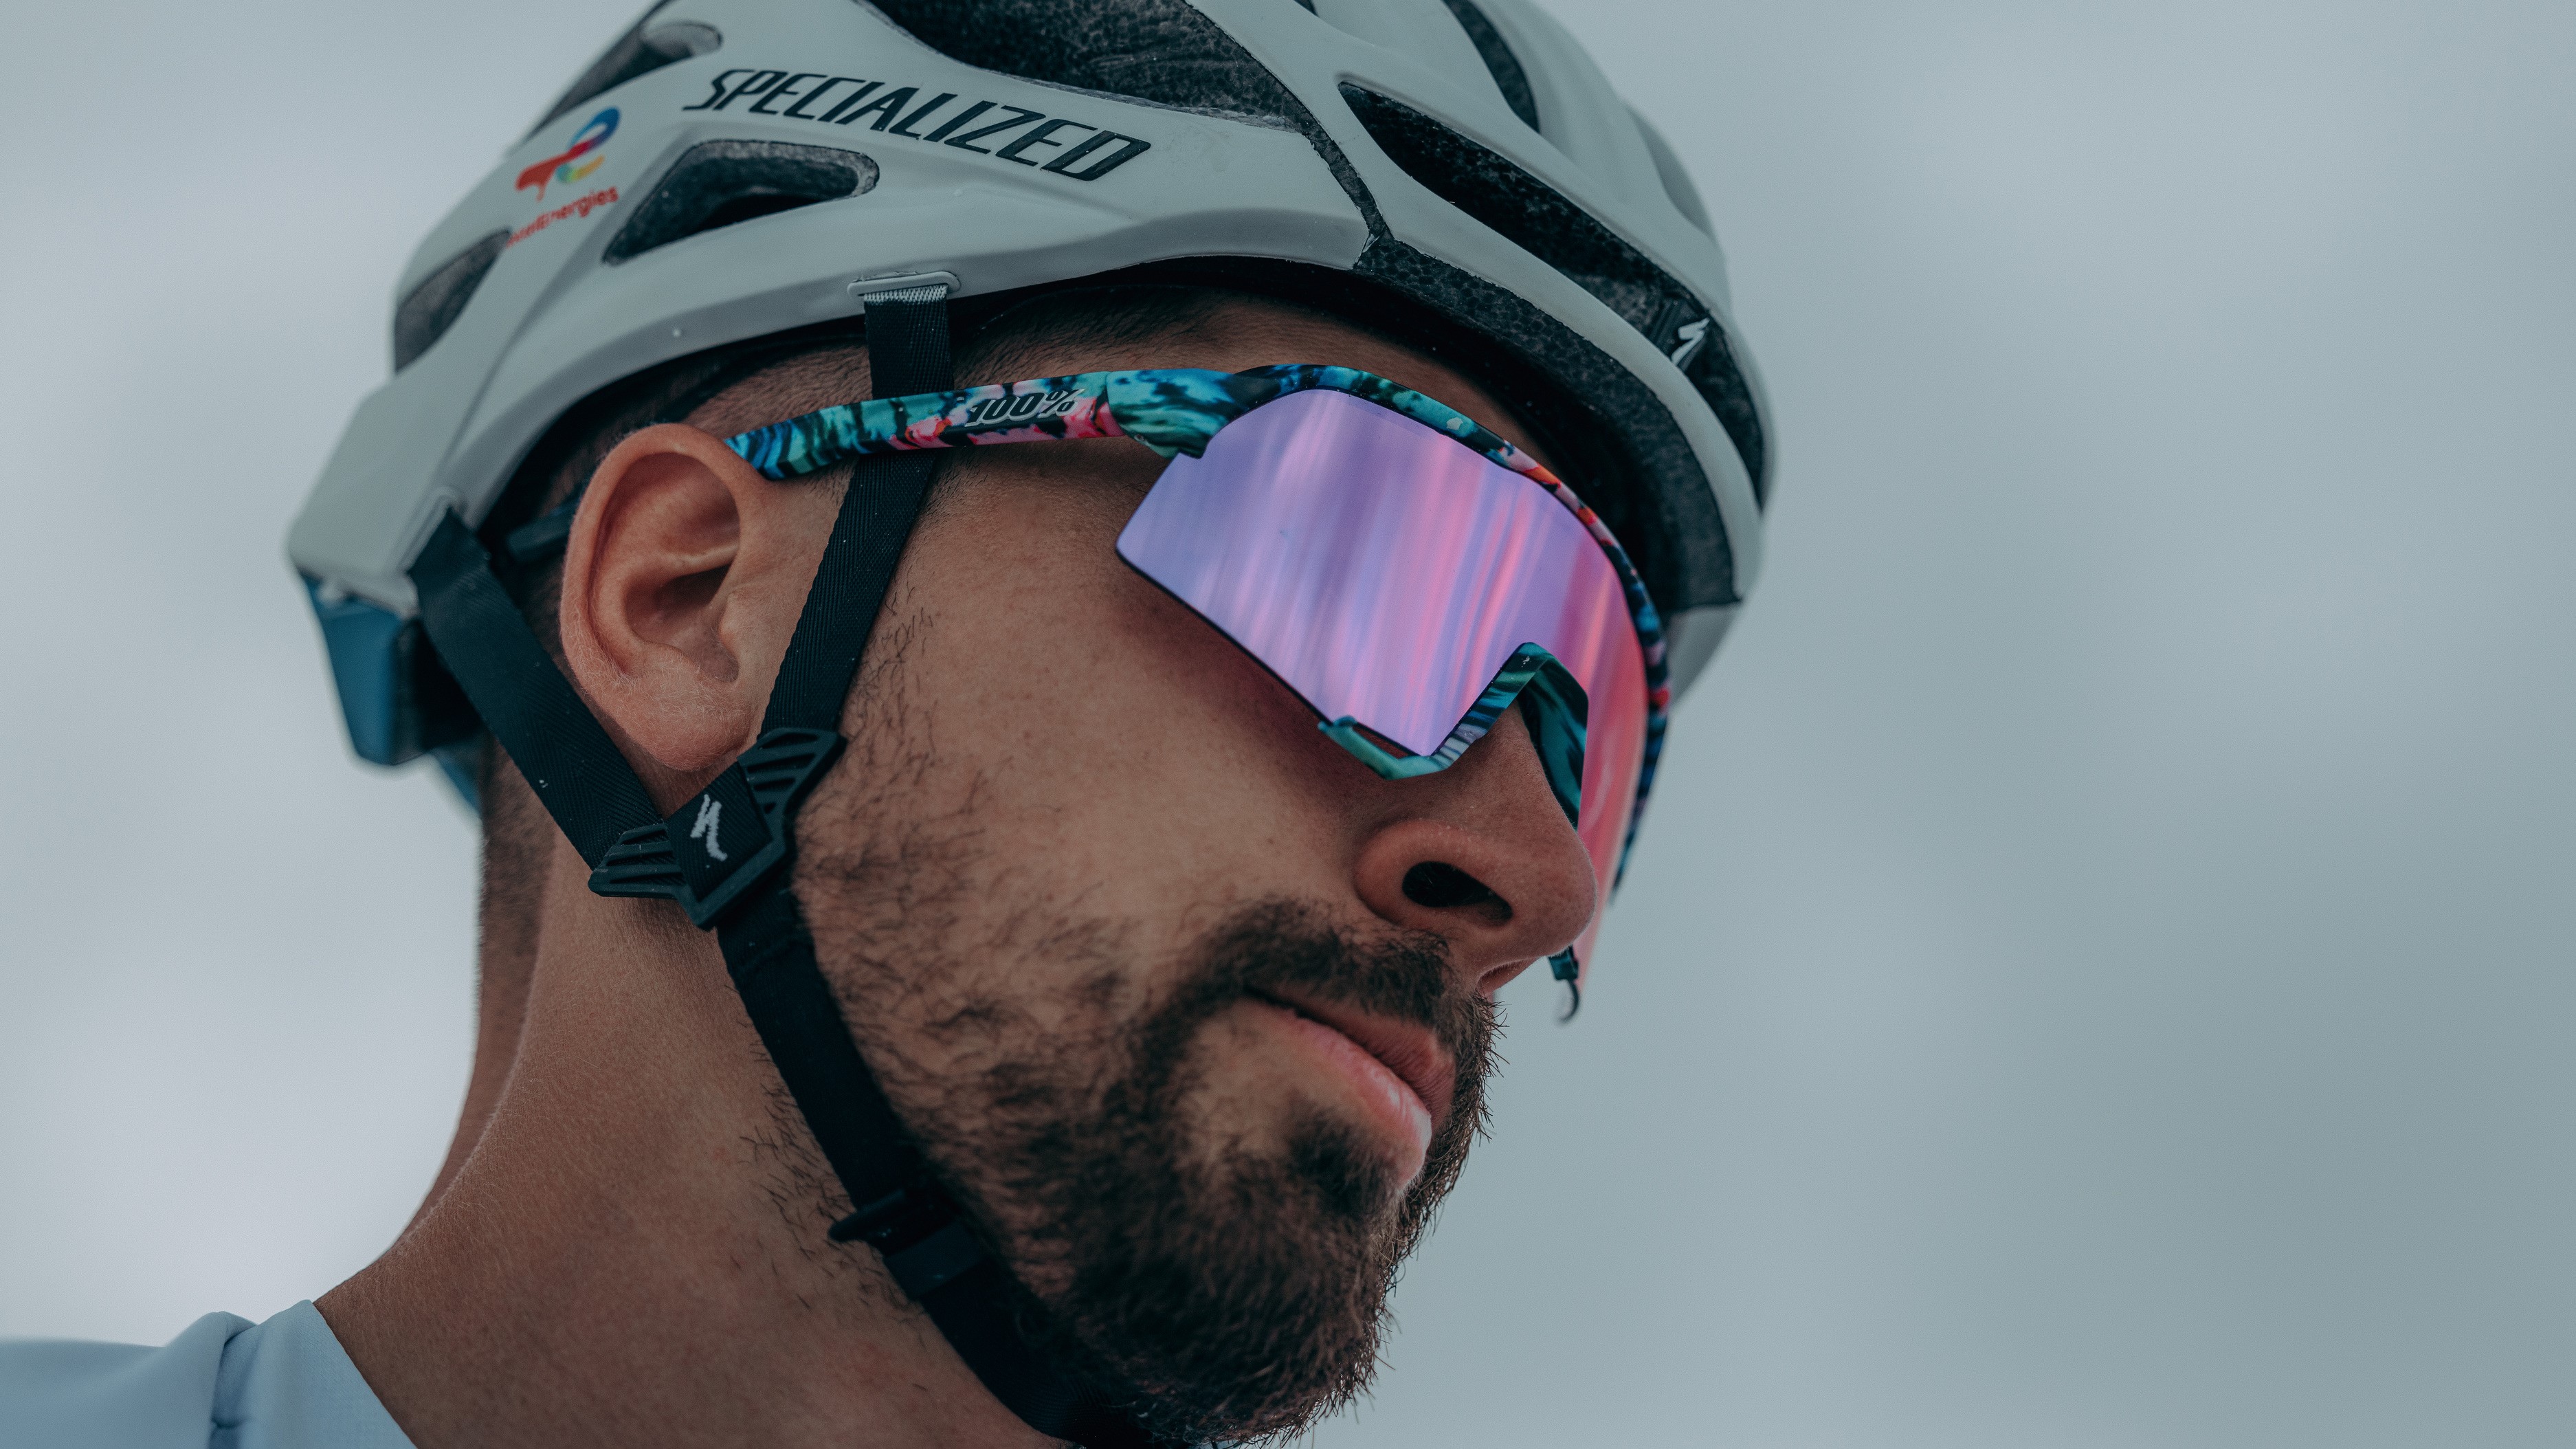 Peter Sagan and 100% go bright with their latest Tour de France 